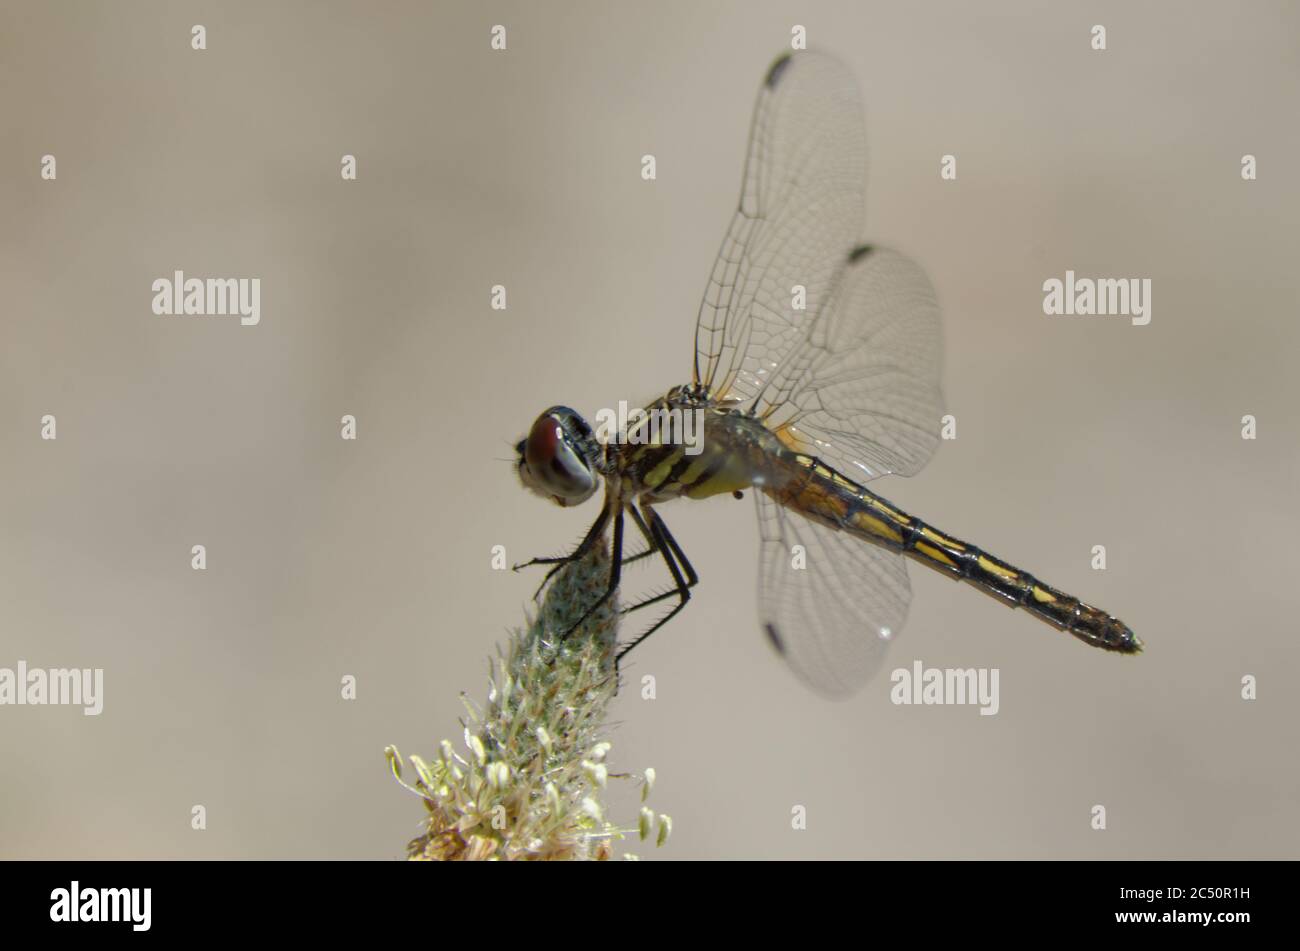 Dragonfly (Pachydipax longipennis) Banque D'Images